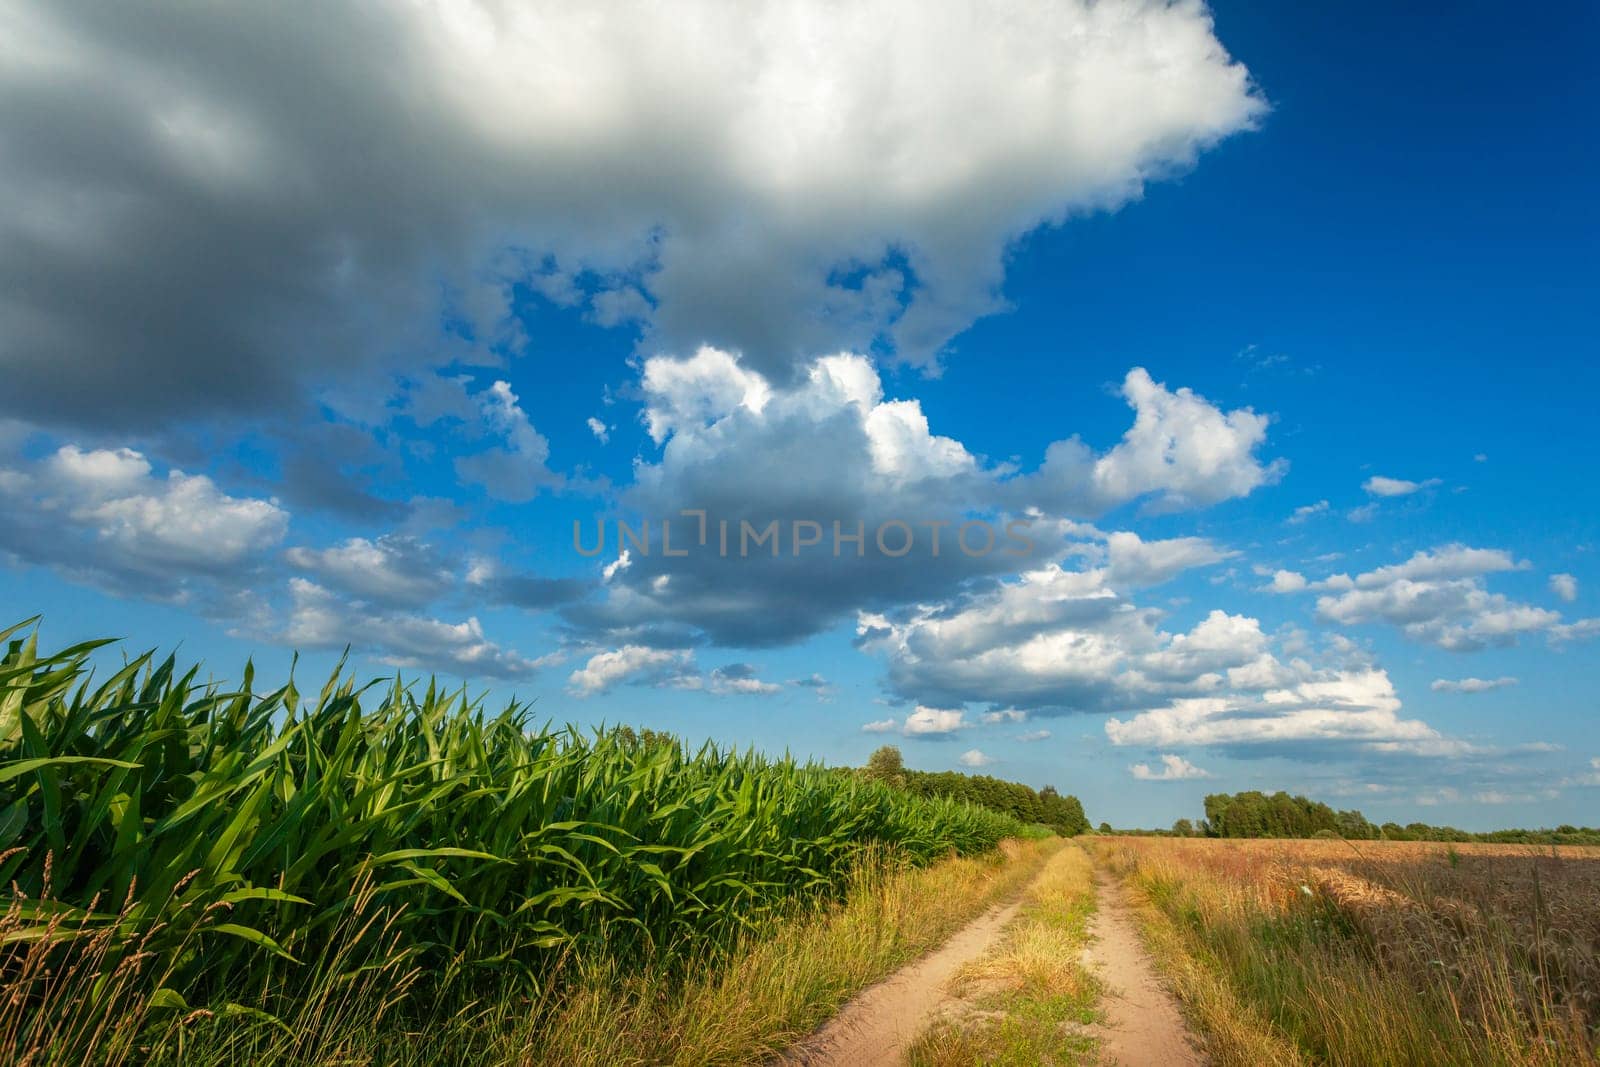 A dirt road next to a cornfield and small clouds in a summer sky by darekb22